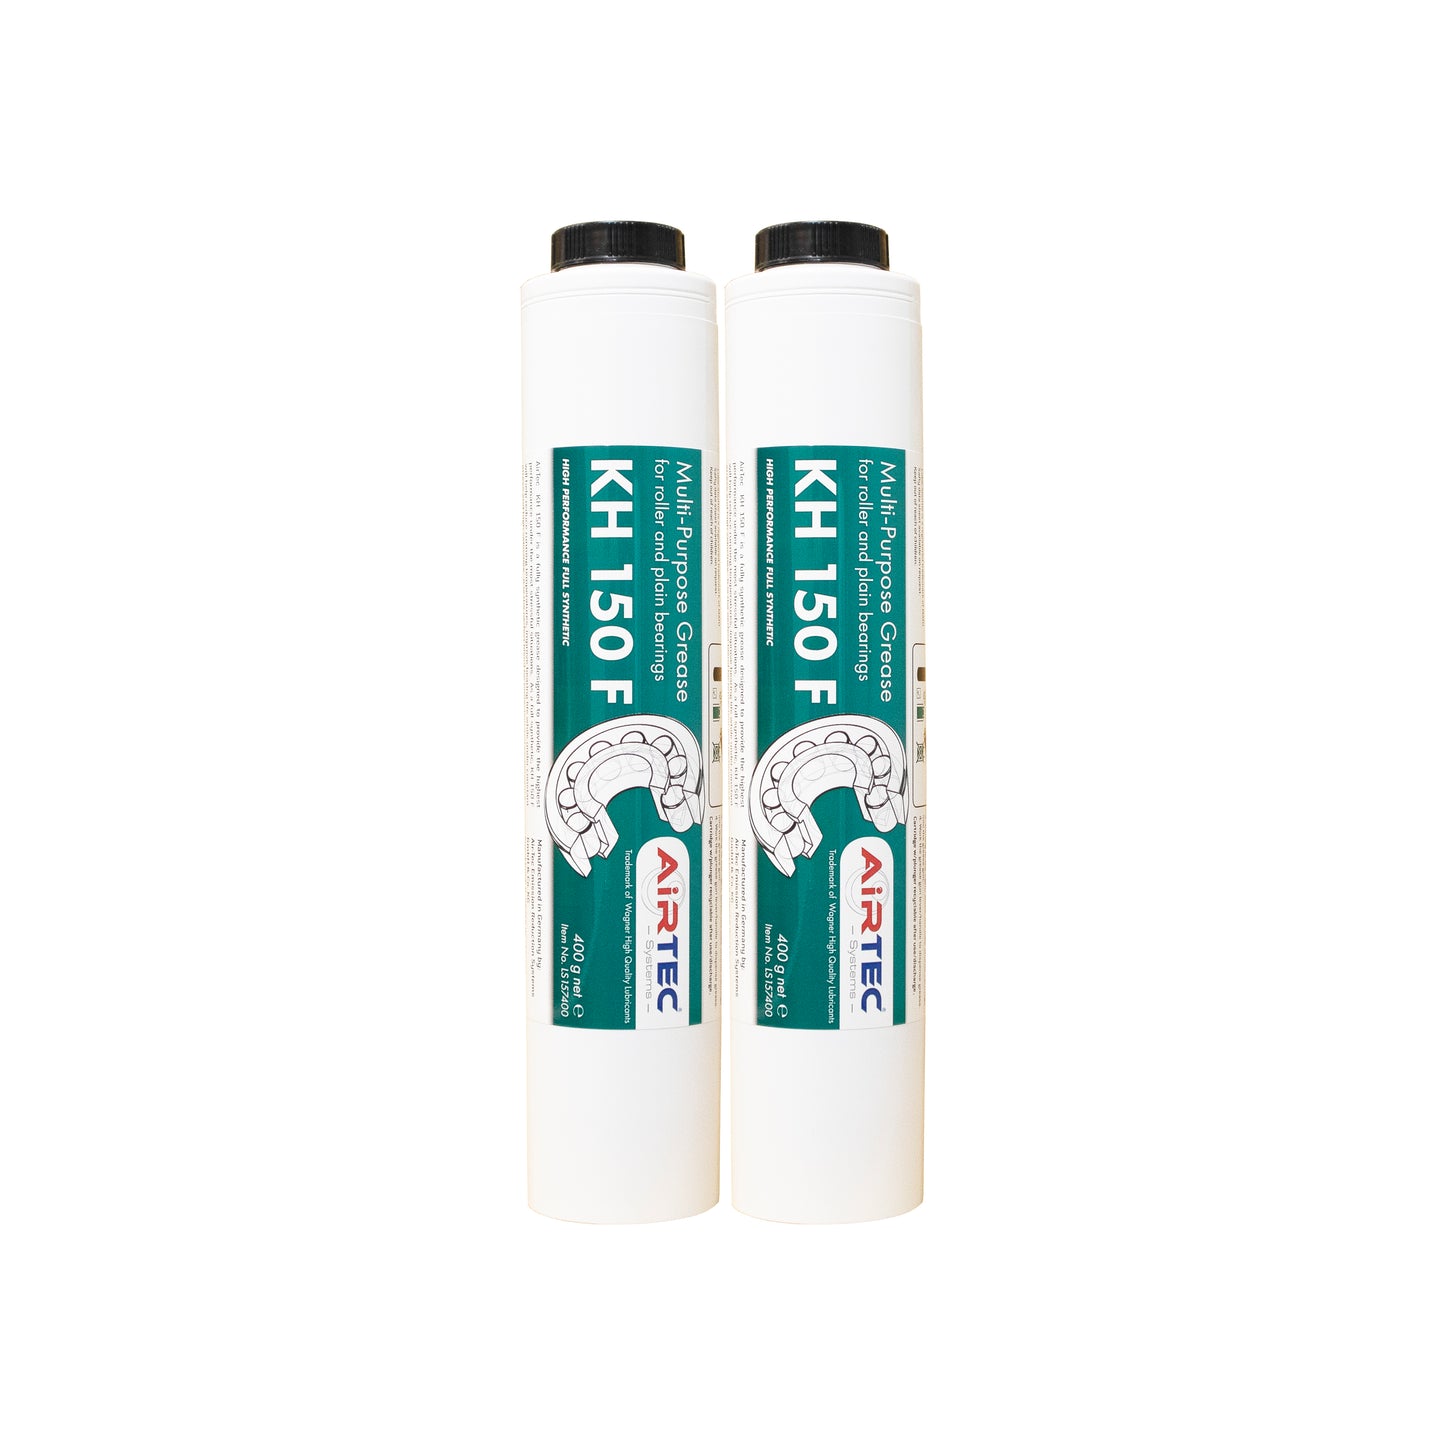 AirTec® KH150 Full Synthetic Low Temperature Grease Cartridge for Lube-Shuttle®